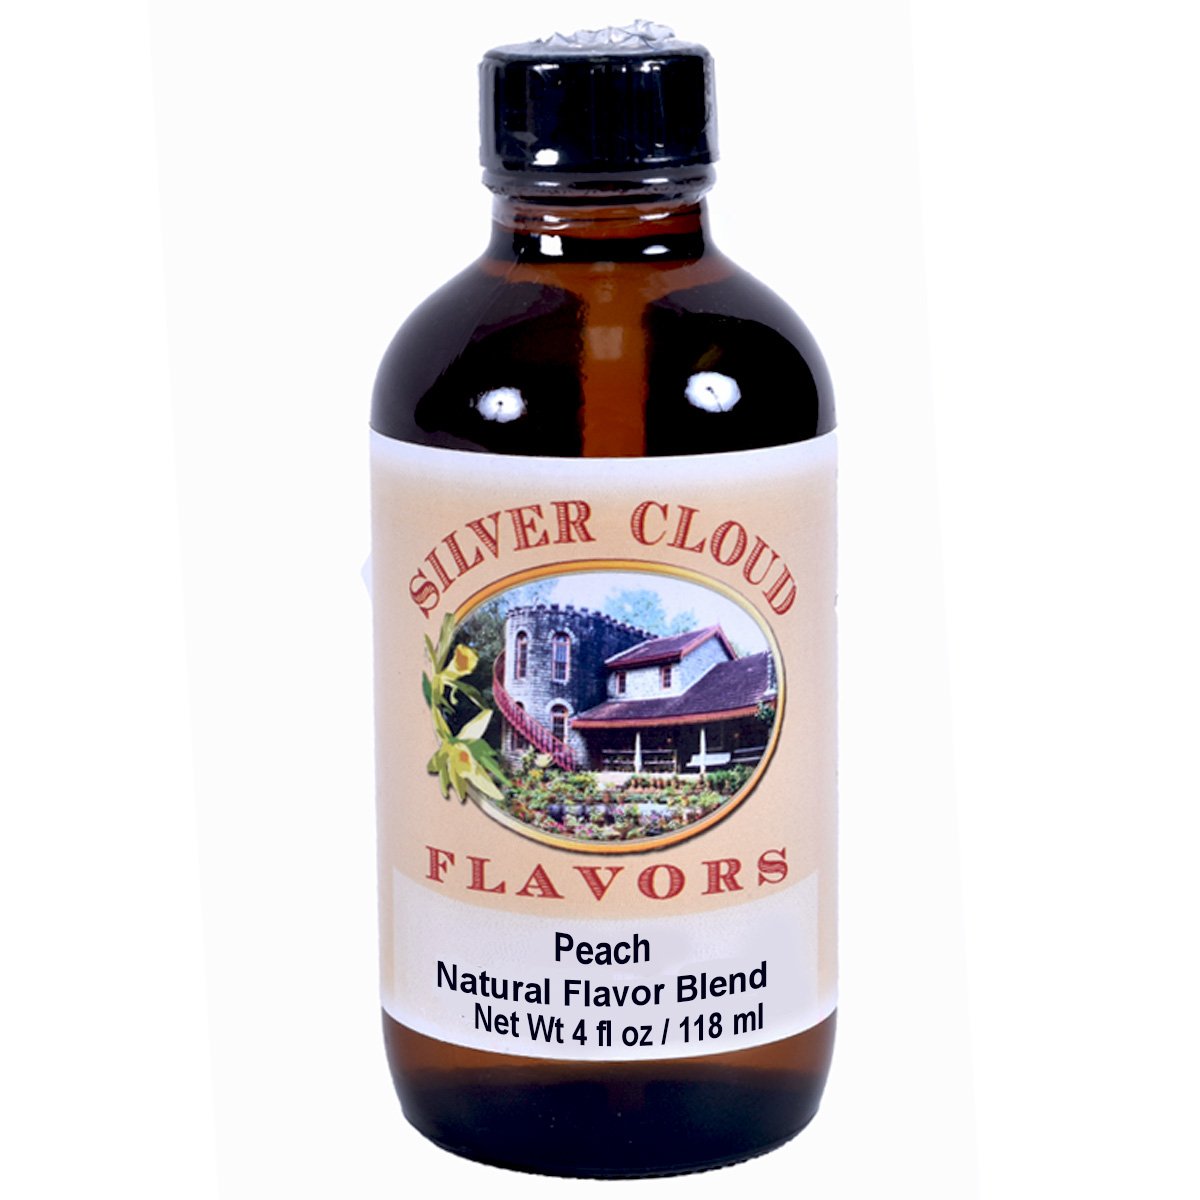 Peach Type, Natural Flavor Blend Silver Cloud Extract - Bake Supply Plus